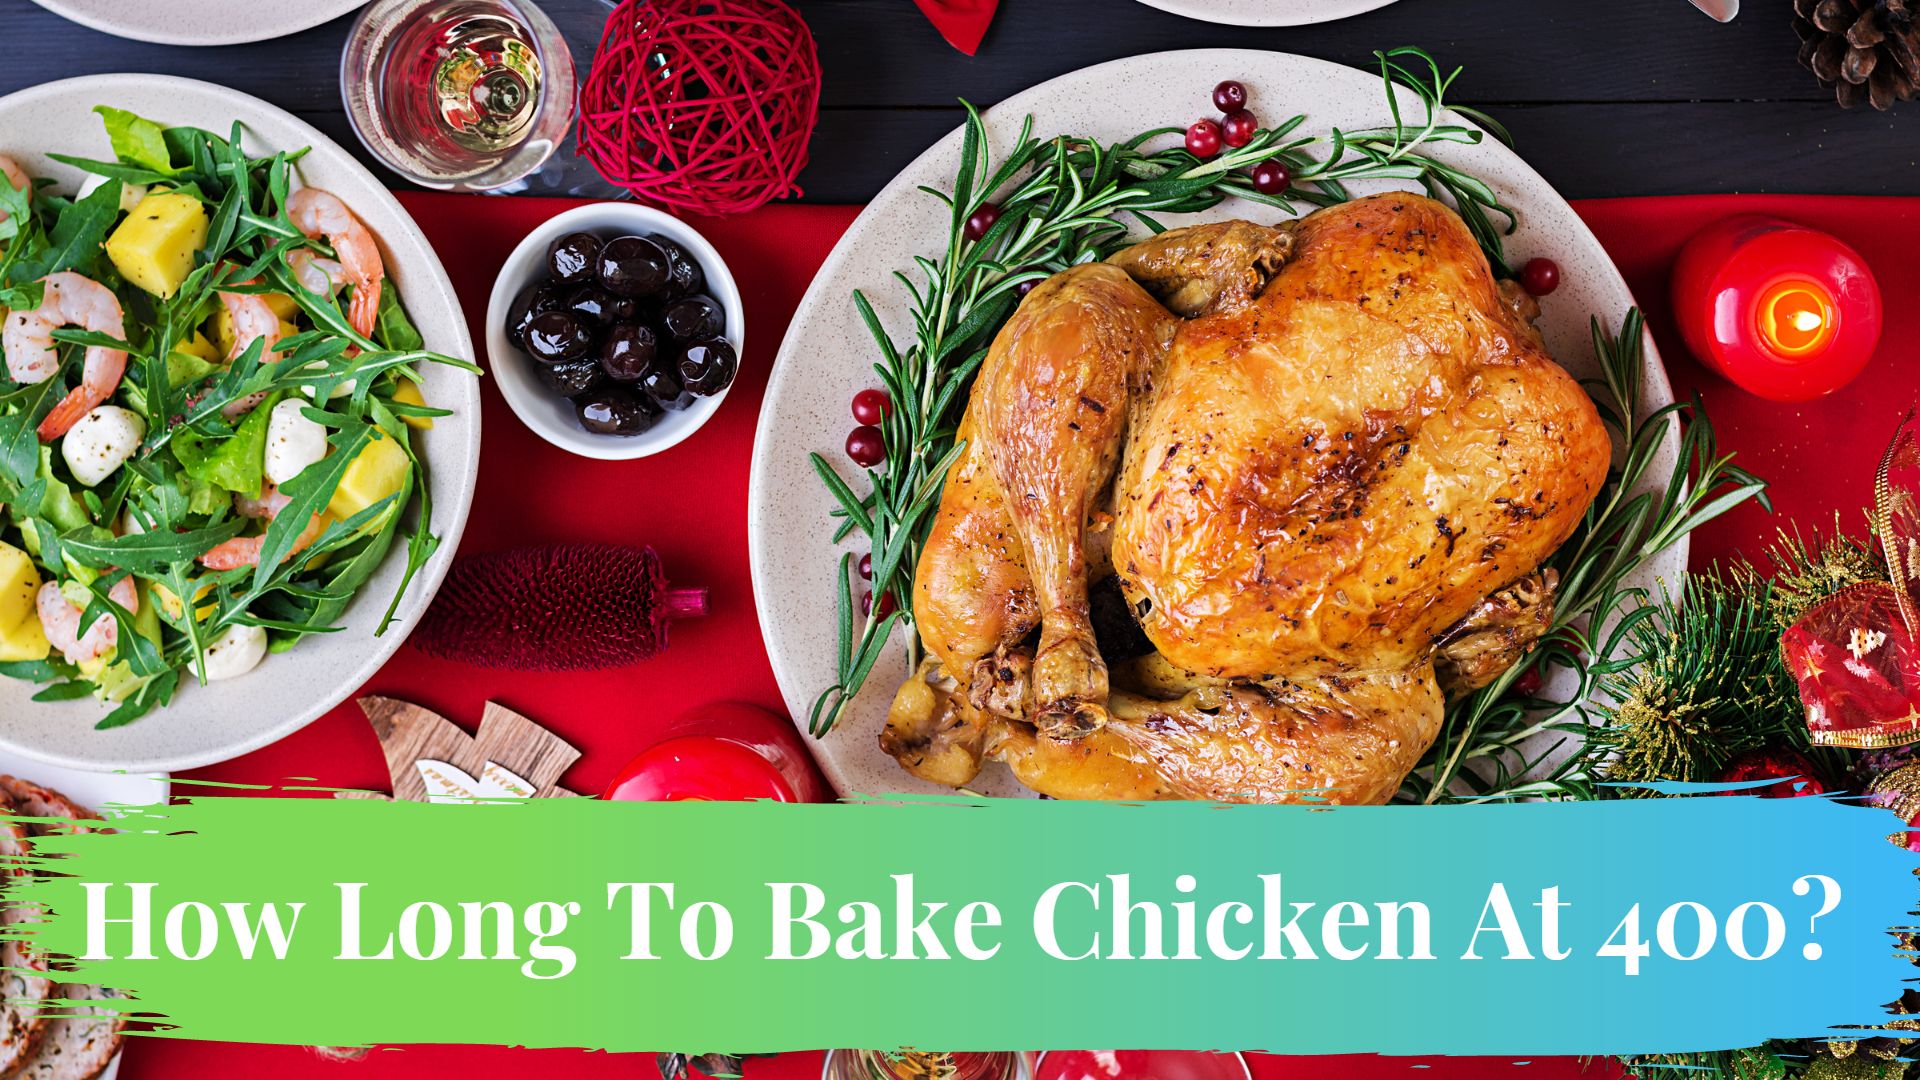 How Long To Bake Chicken At 400?